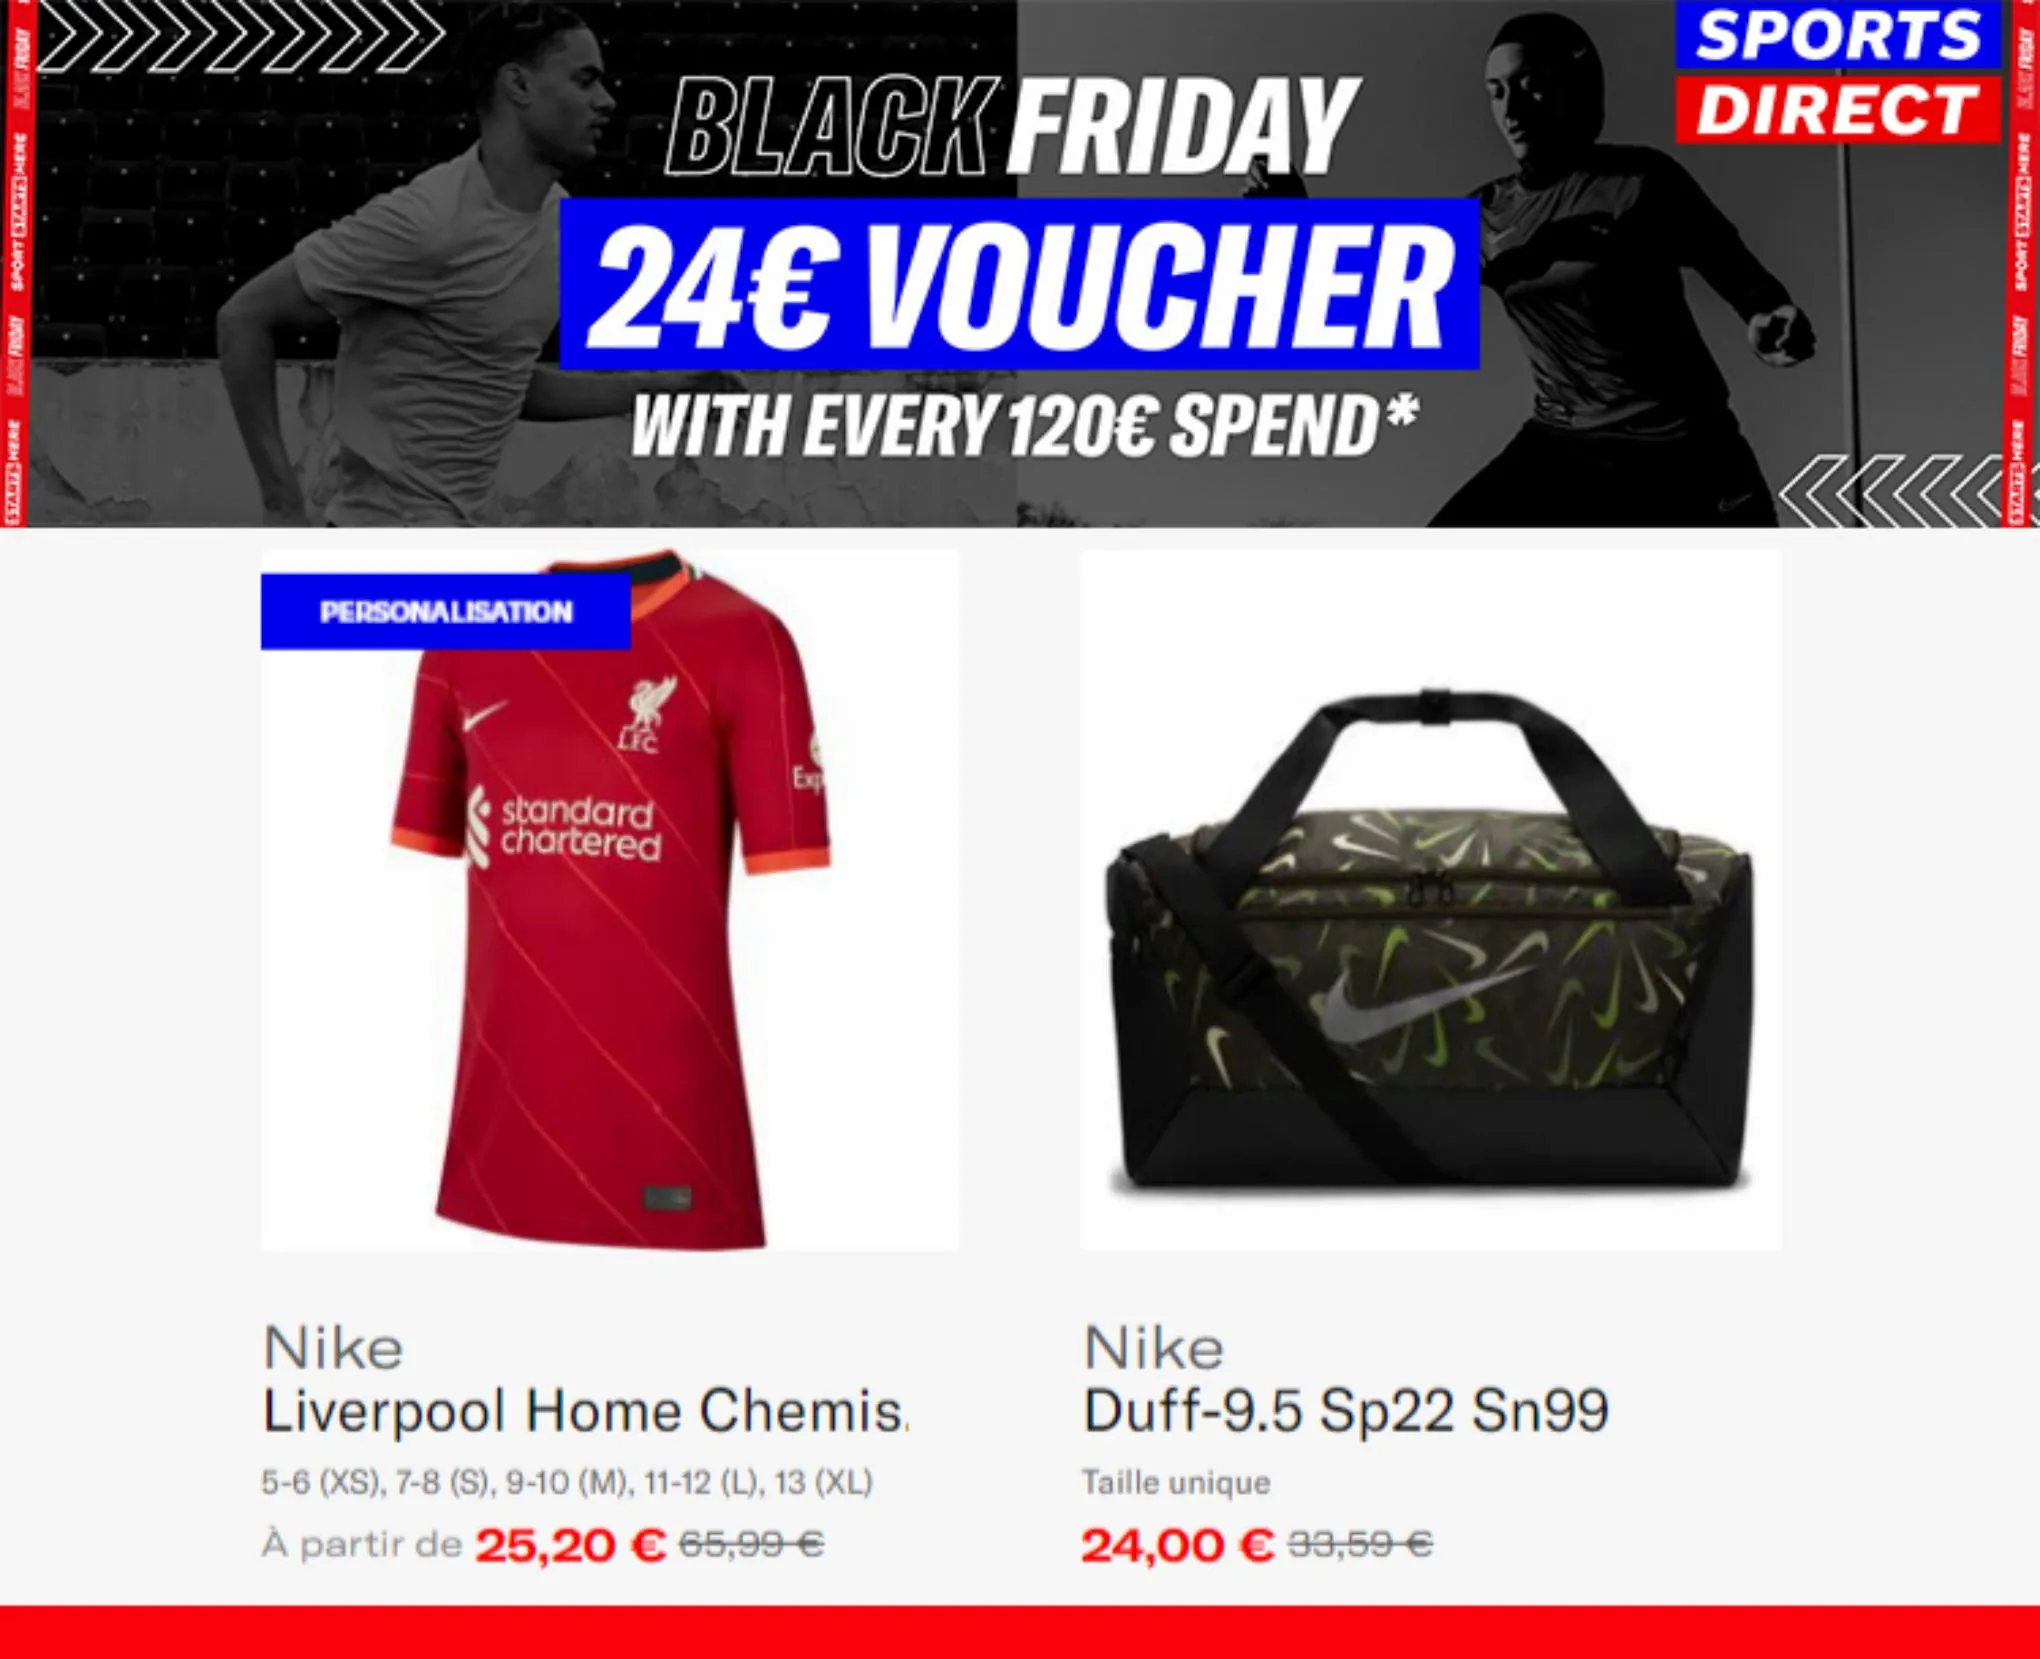 Catalogue Offres Sports direct Black Friday, page 00001